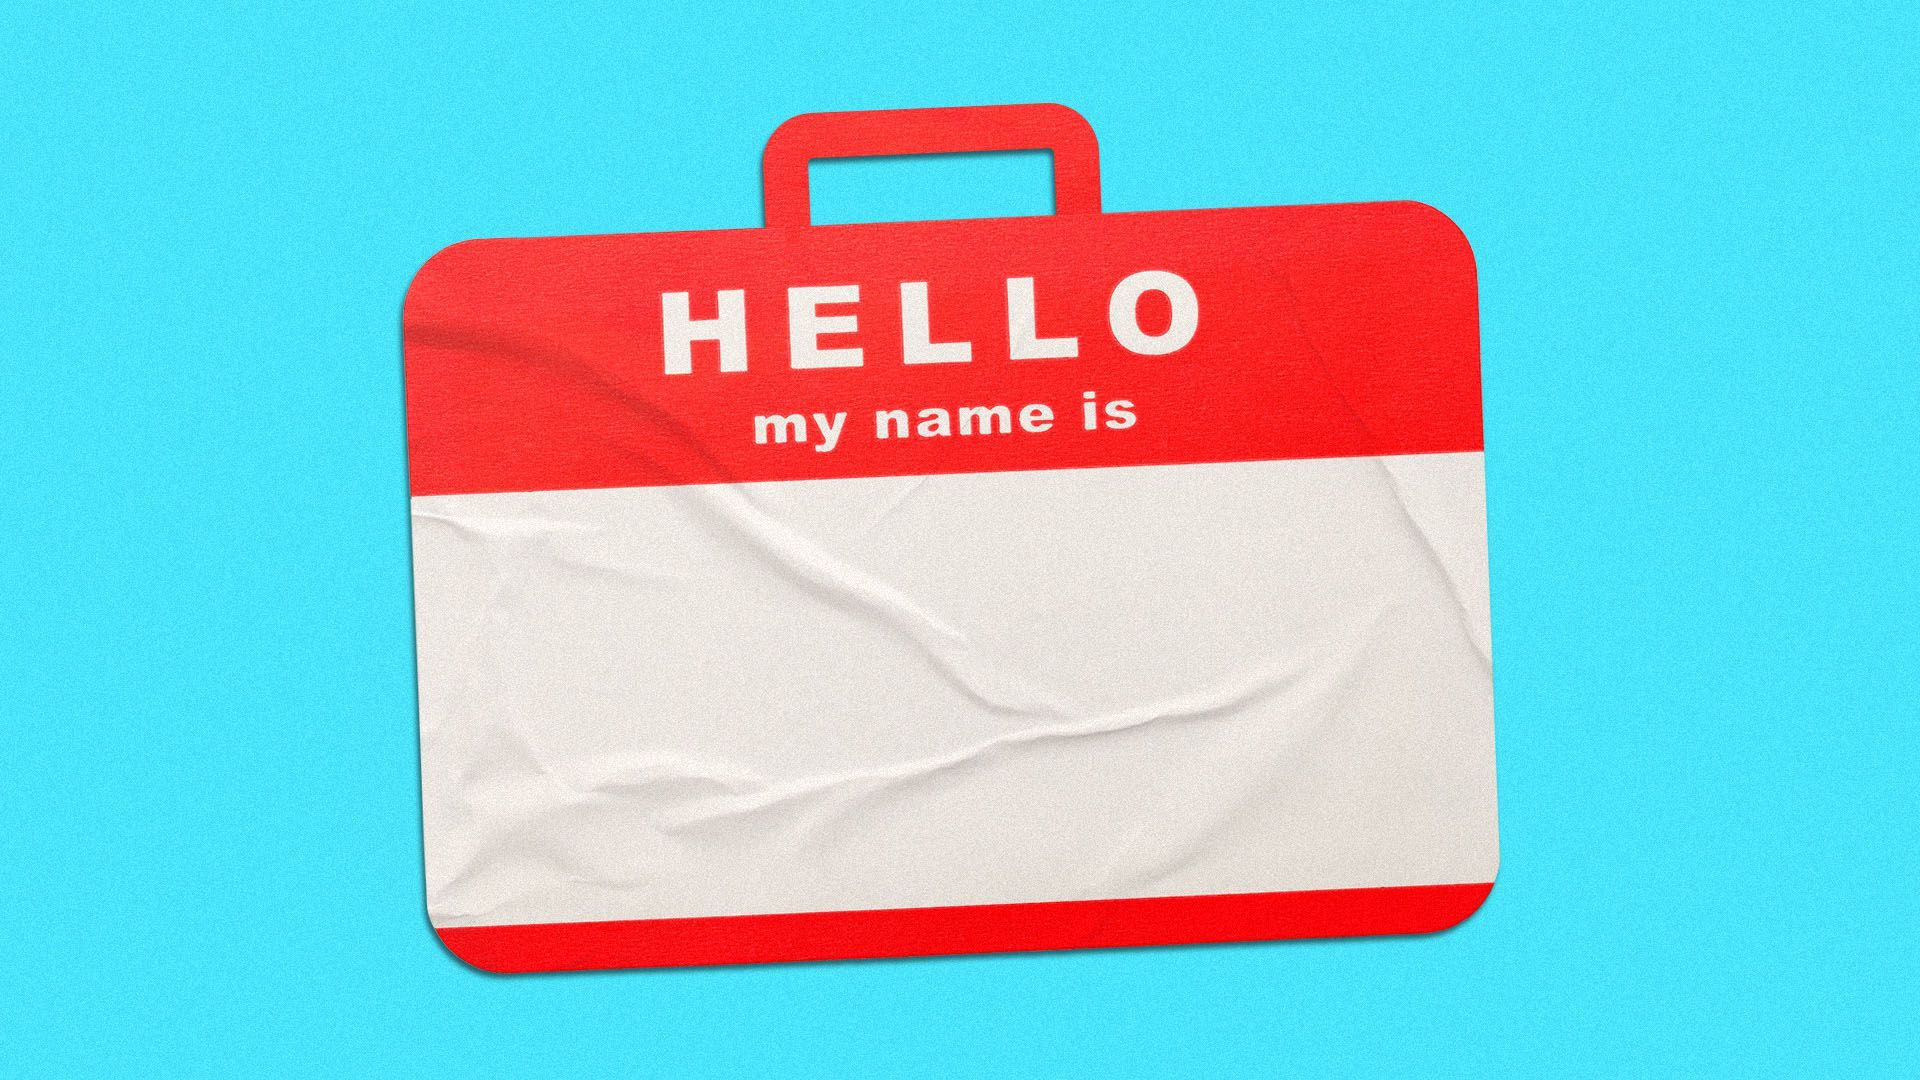 Illustration of a name tag sticker in the shape of a briefcase